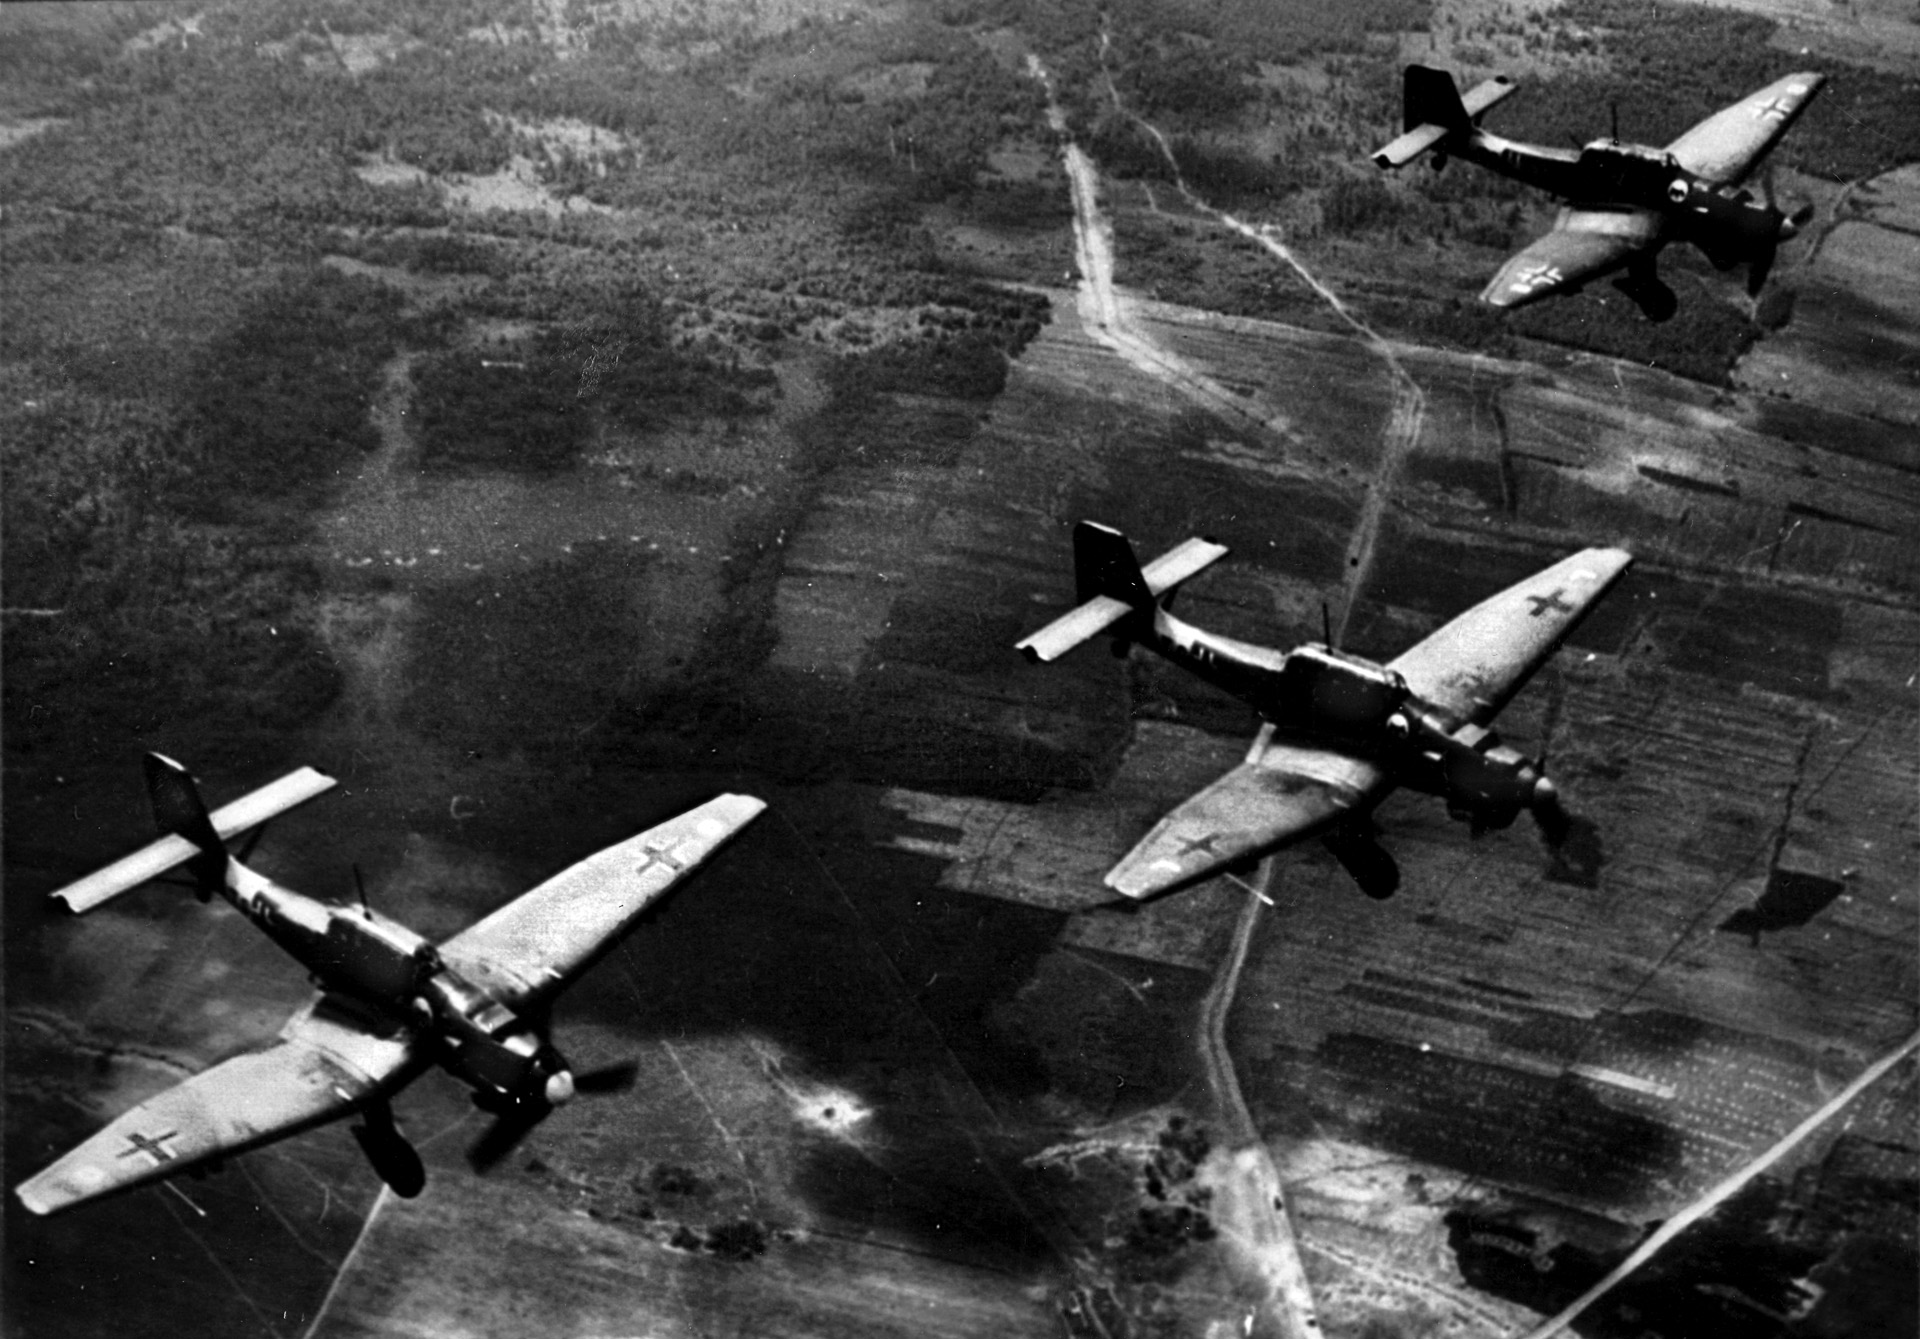 Early in the attempt to defeat the Soviet Union, German aircraft controlled the skies. Here three Junkers Ju-87 Stuka dive bombers fly high over their target city of Novgorod. The dive bombers proved effective as airborne artillery against ground targets, but the growing number of Soviet fighters soon took their toll of the Luftwaffe.